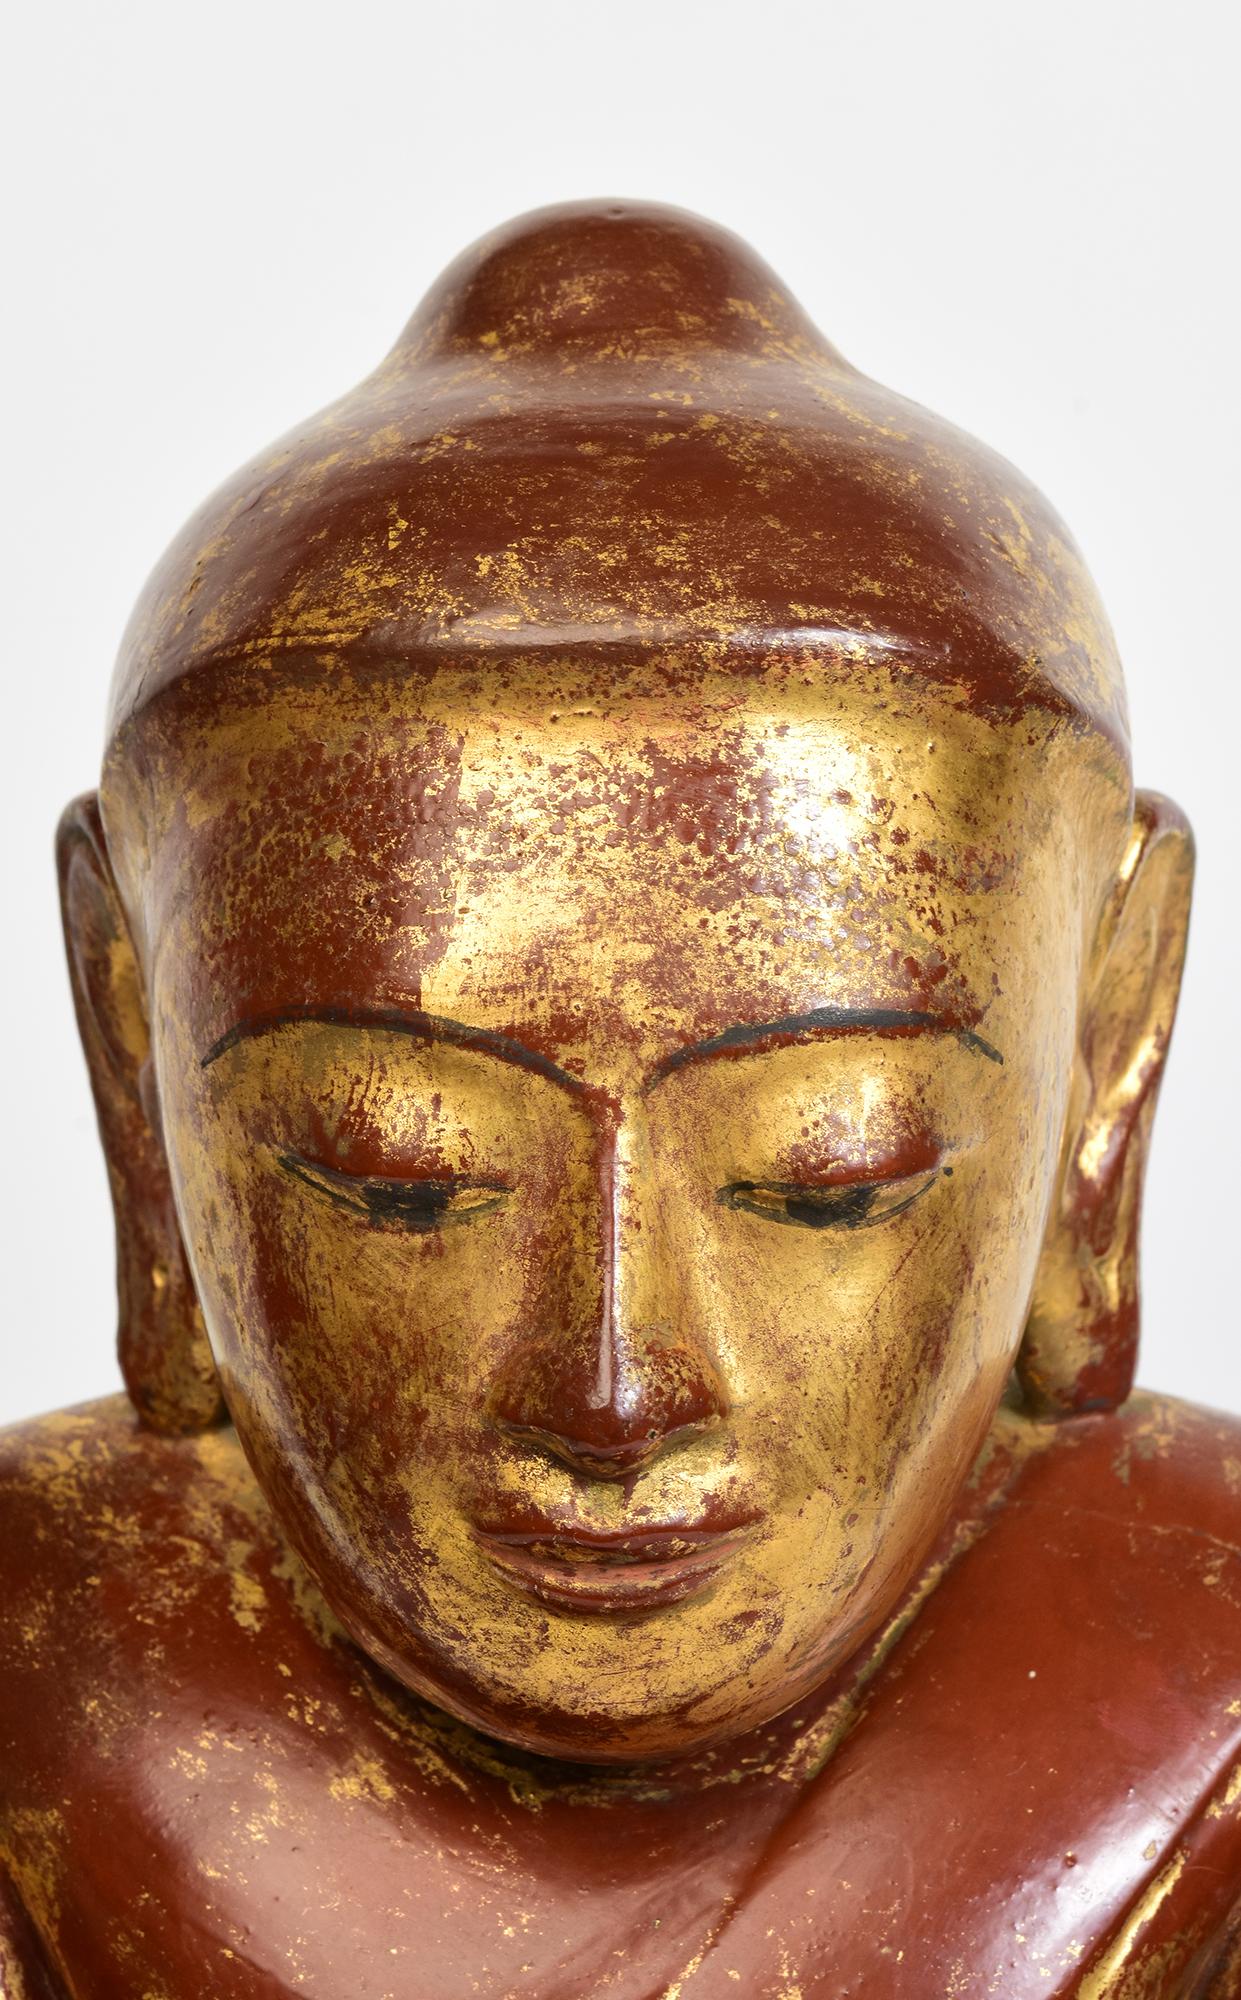 Rare antique Burmese wooden Buddha sitting in Mara Vijaya (calling the earth to witness) posture on double lotus base.

Age: Burma, Ava Period, 16th Century
Size: Height 49.5 C.M. / Width 28 C.M. / Depth 18.5 C.M.
Condition: Nice condition overall